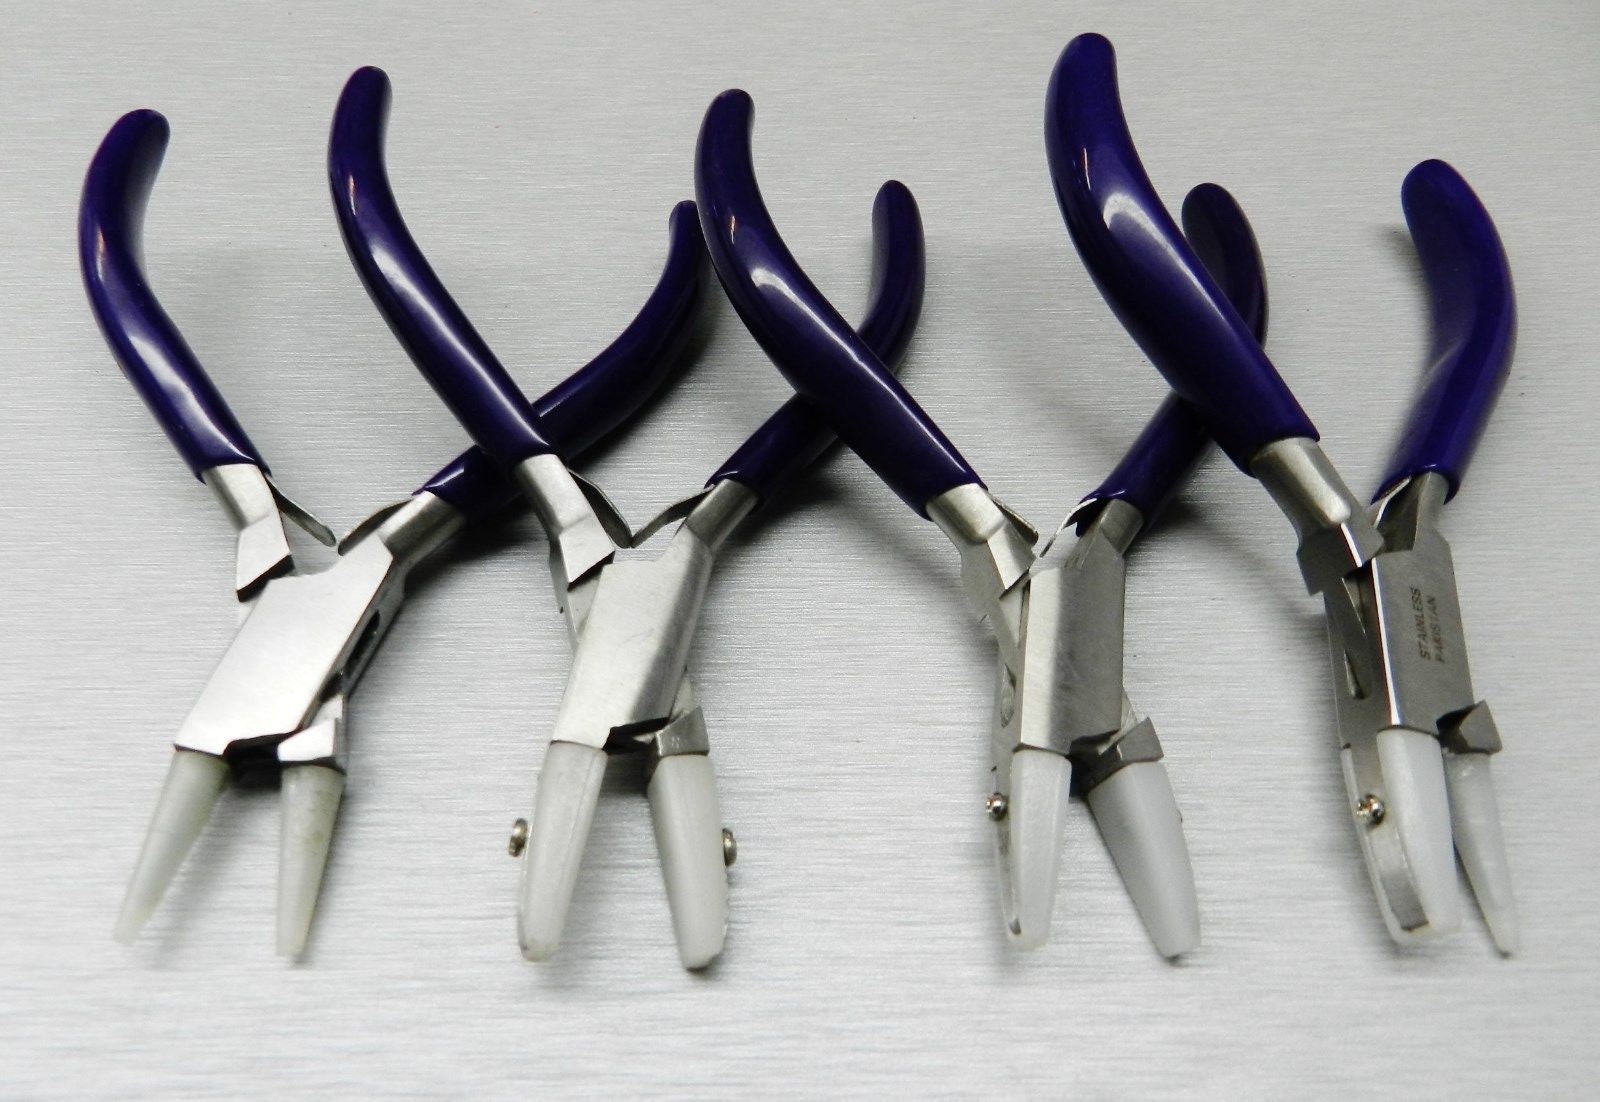 Professional Stainless Steel Prevent Injury Flat Nylon Jaw Pliers